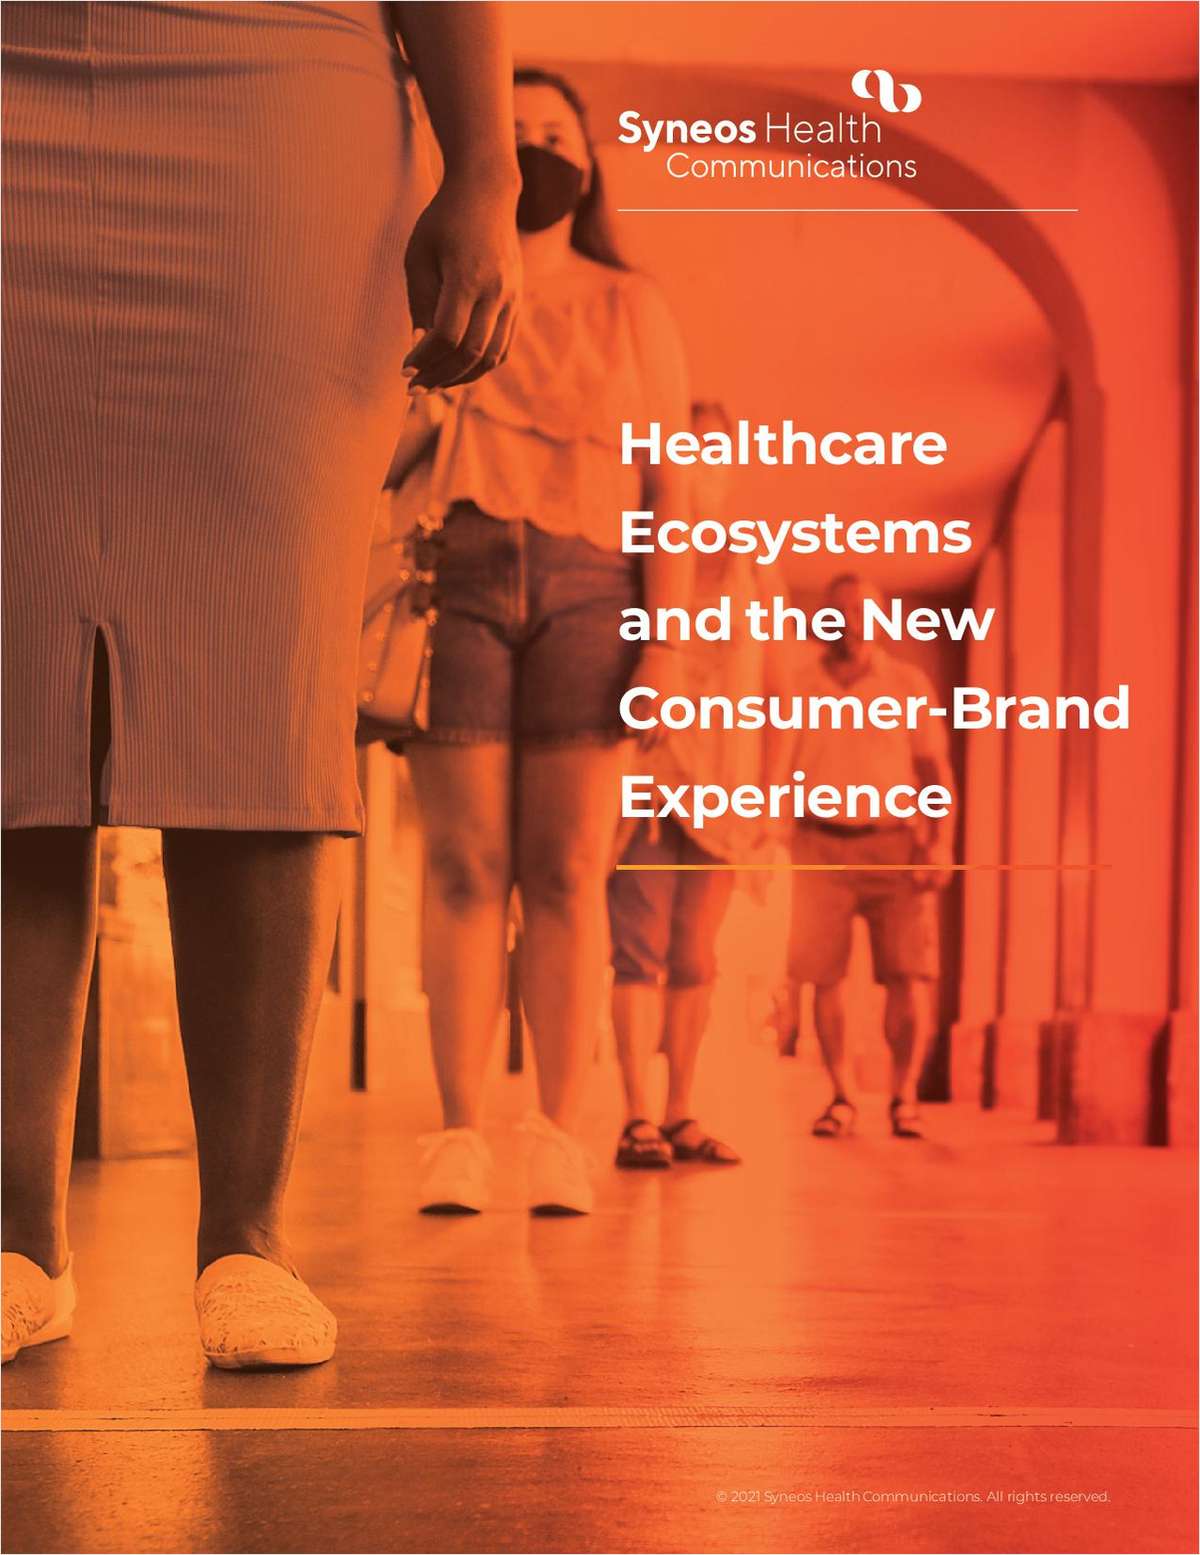 Healthcare Ecosystems and the New Consumer-Brand Experience